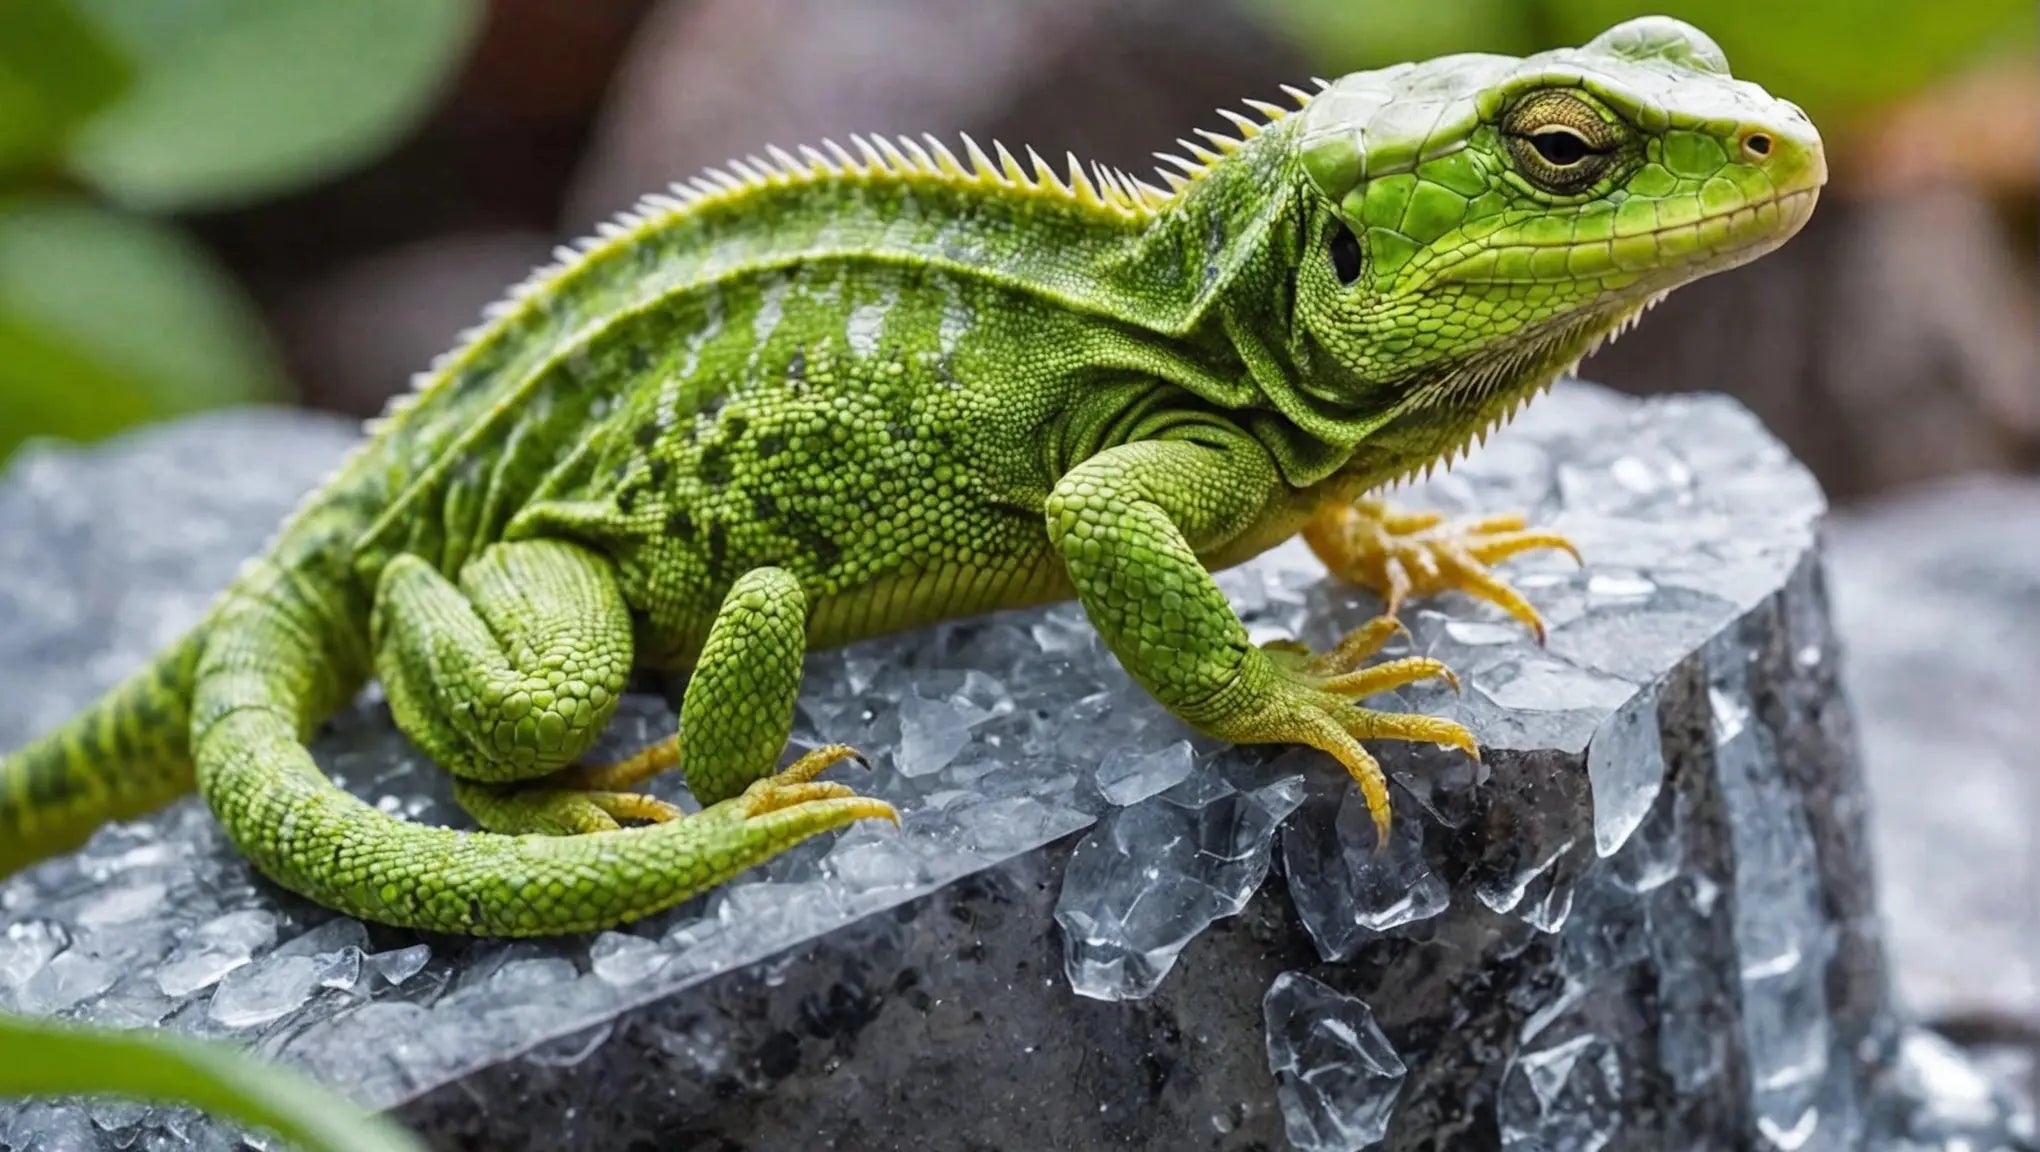 Top 5 Frozen Food for Reptiles: A Complete Guide